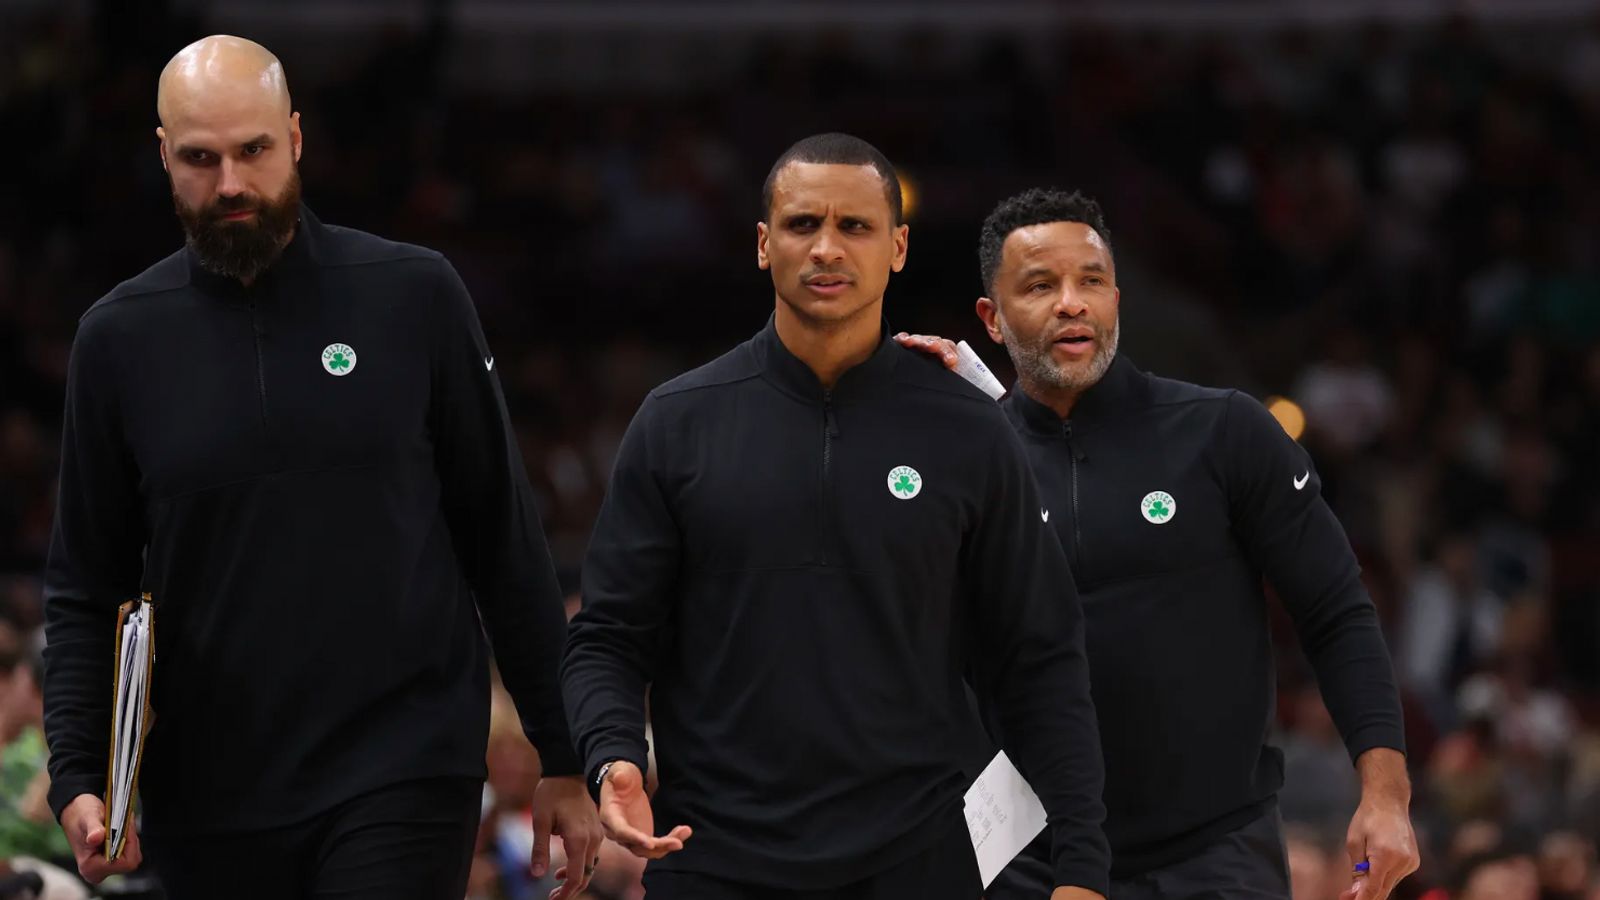 The Celtics planned to plant their flag atop the NBA by beating